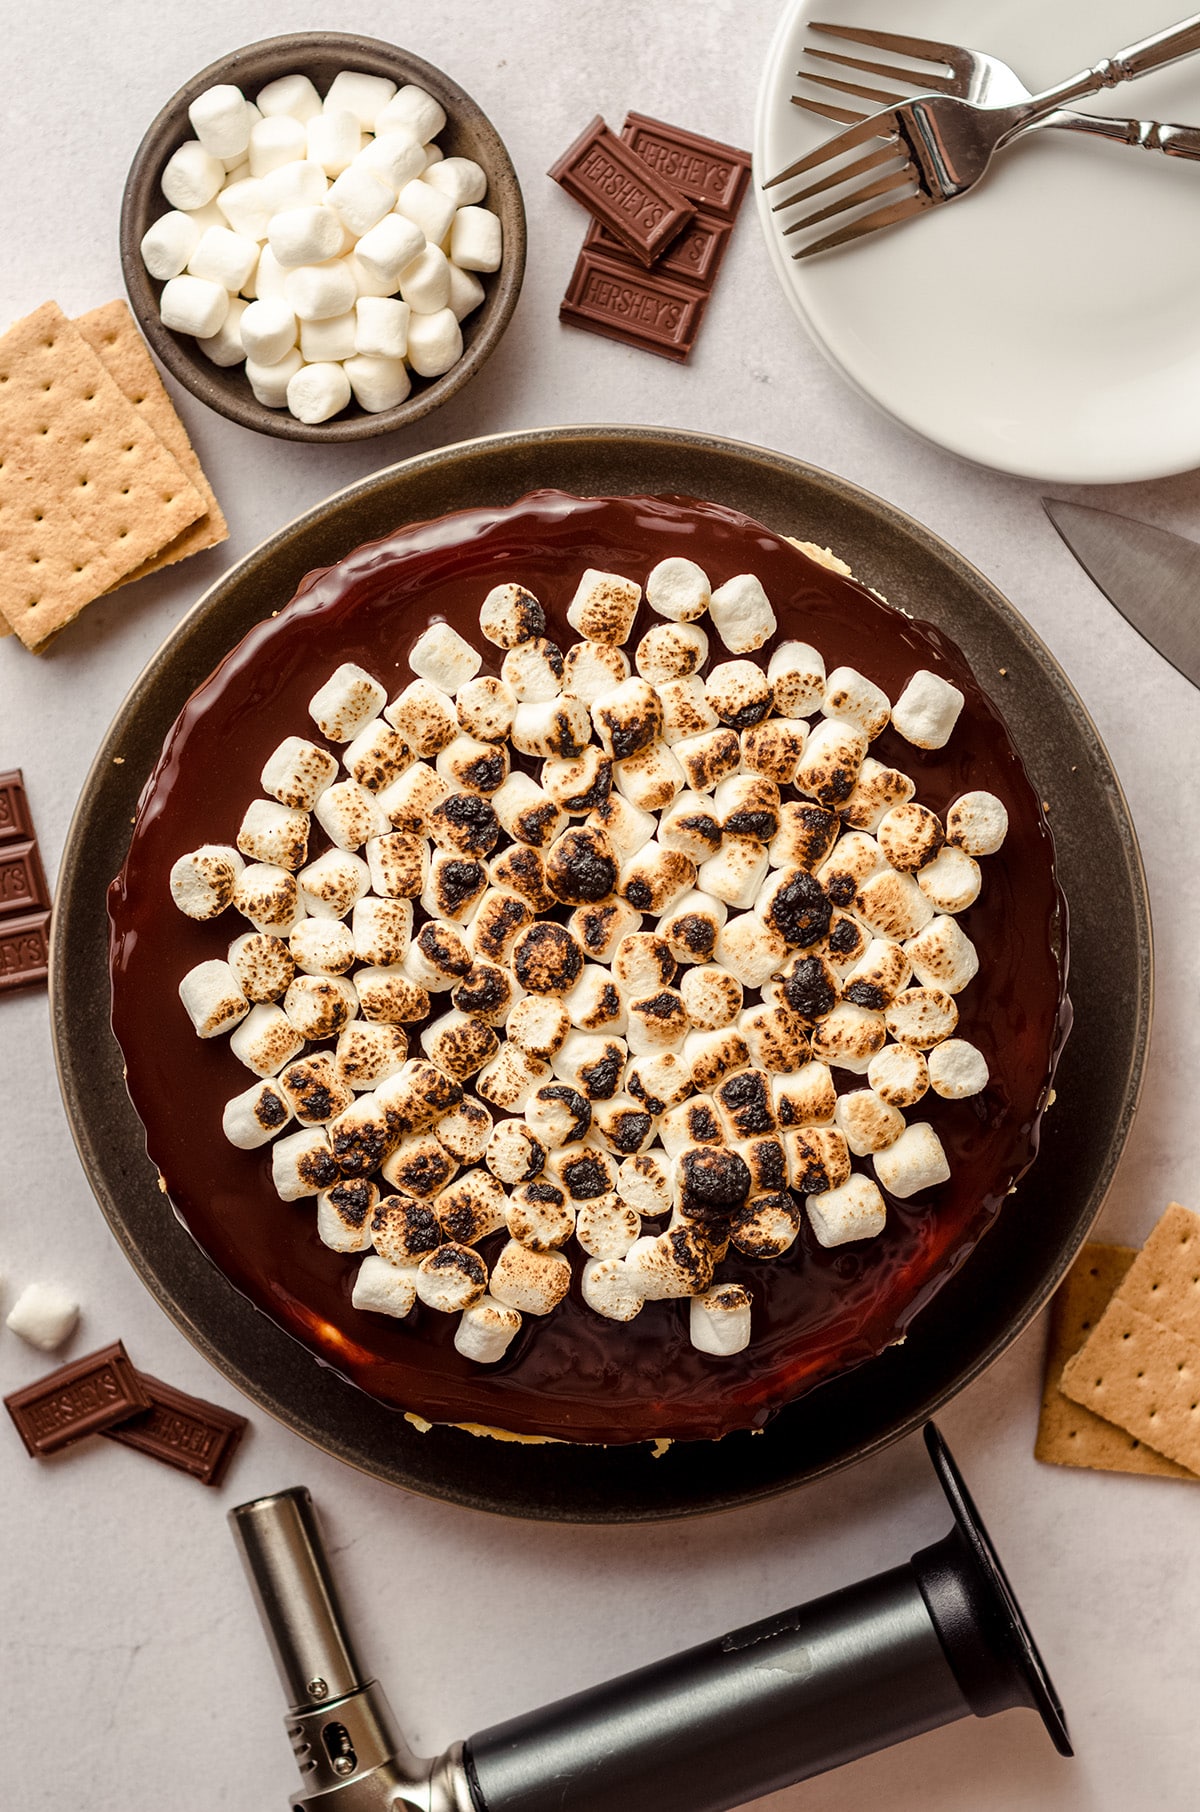 An overhead view of a large, chocolate topped cheesecake with toasted marshmallows.